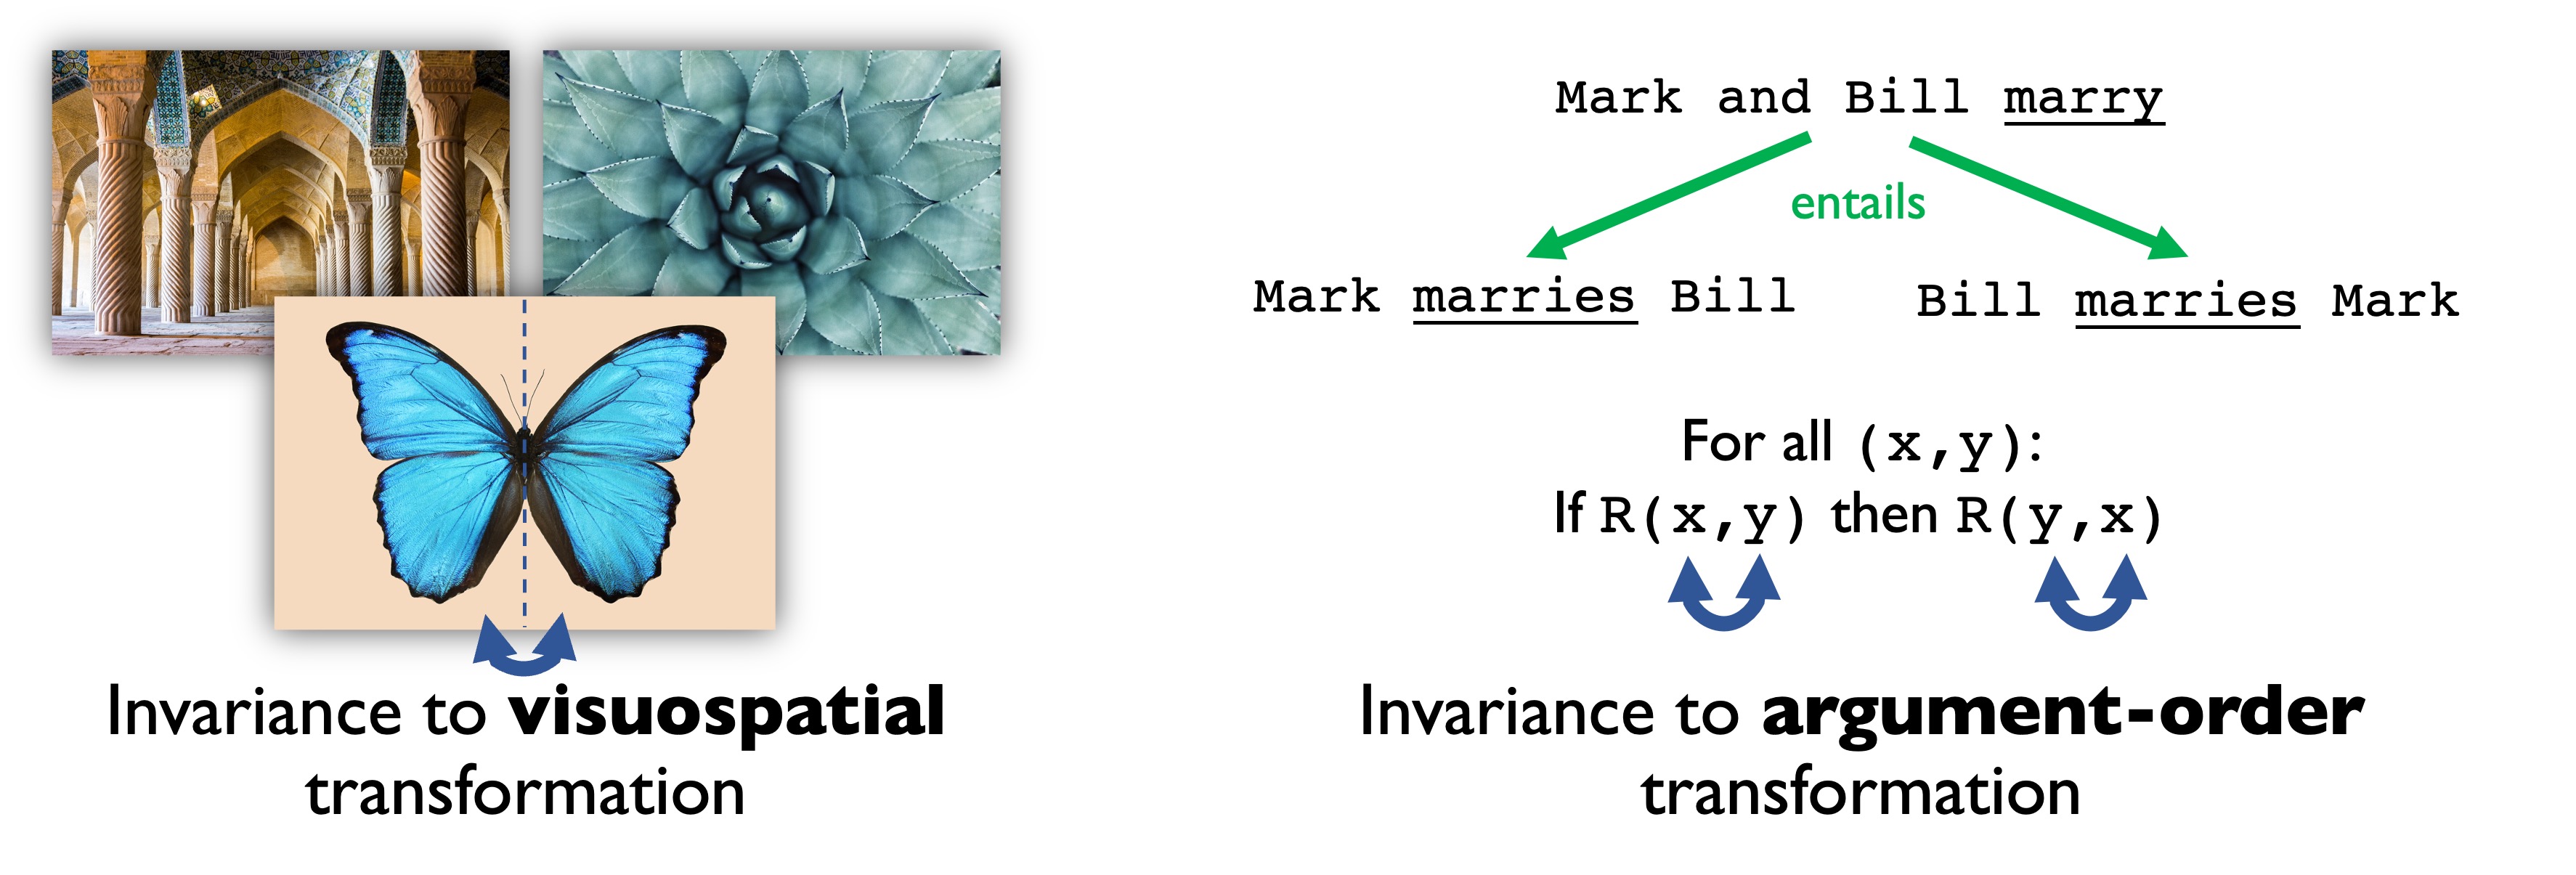 On the left, a symmetrical building, plant, and butterfly; on the right, symmetrical sentence “Mark and Bill marry”